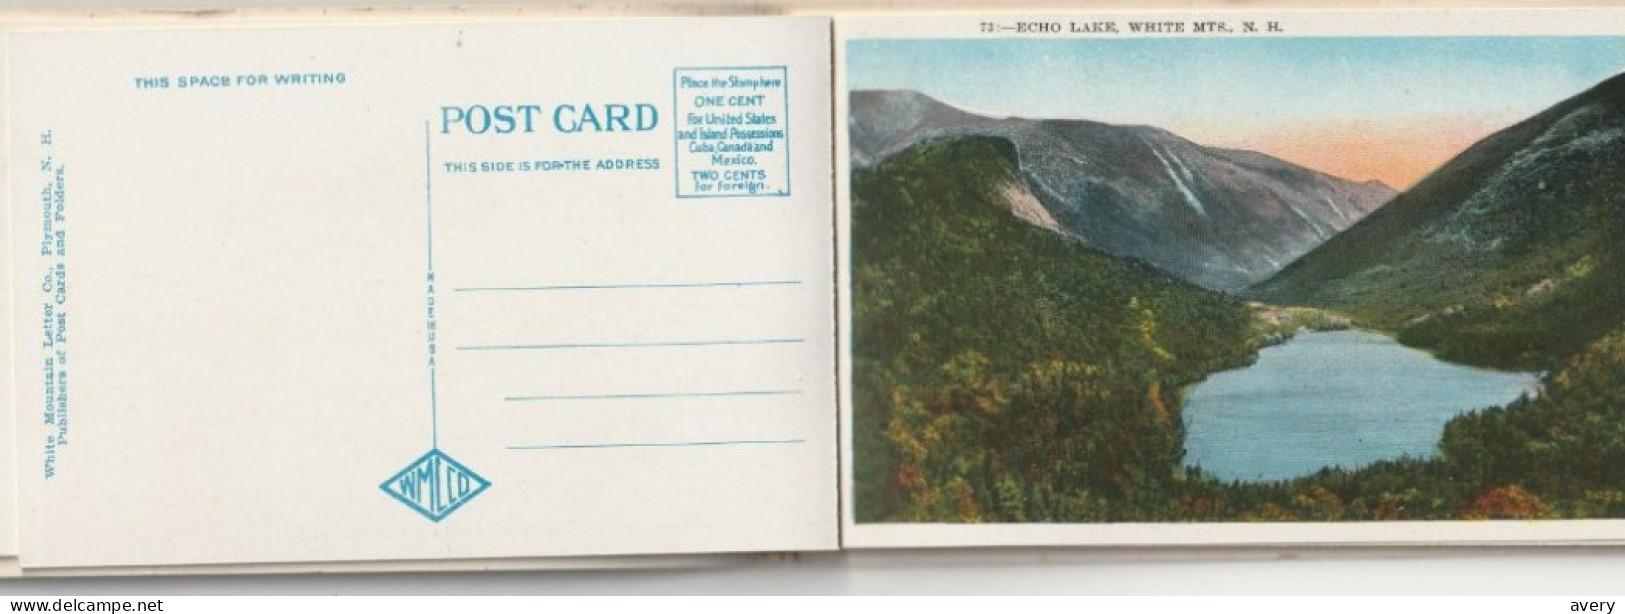 Souvenir Album Of The White Mountains, New Hampshire The "Switzerland Of America" 9 Detachable Post Cards, 1 Used - White Mountains